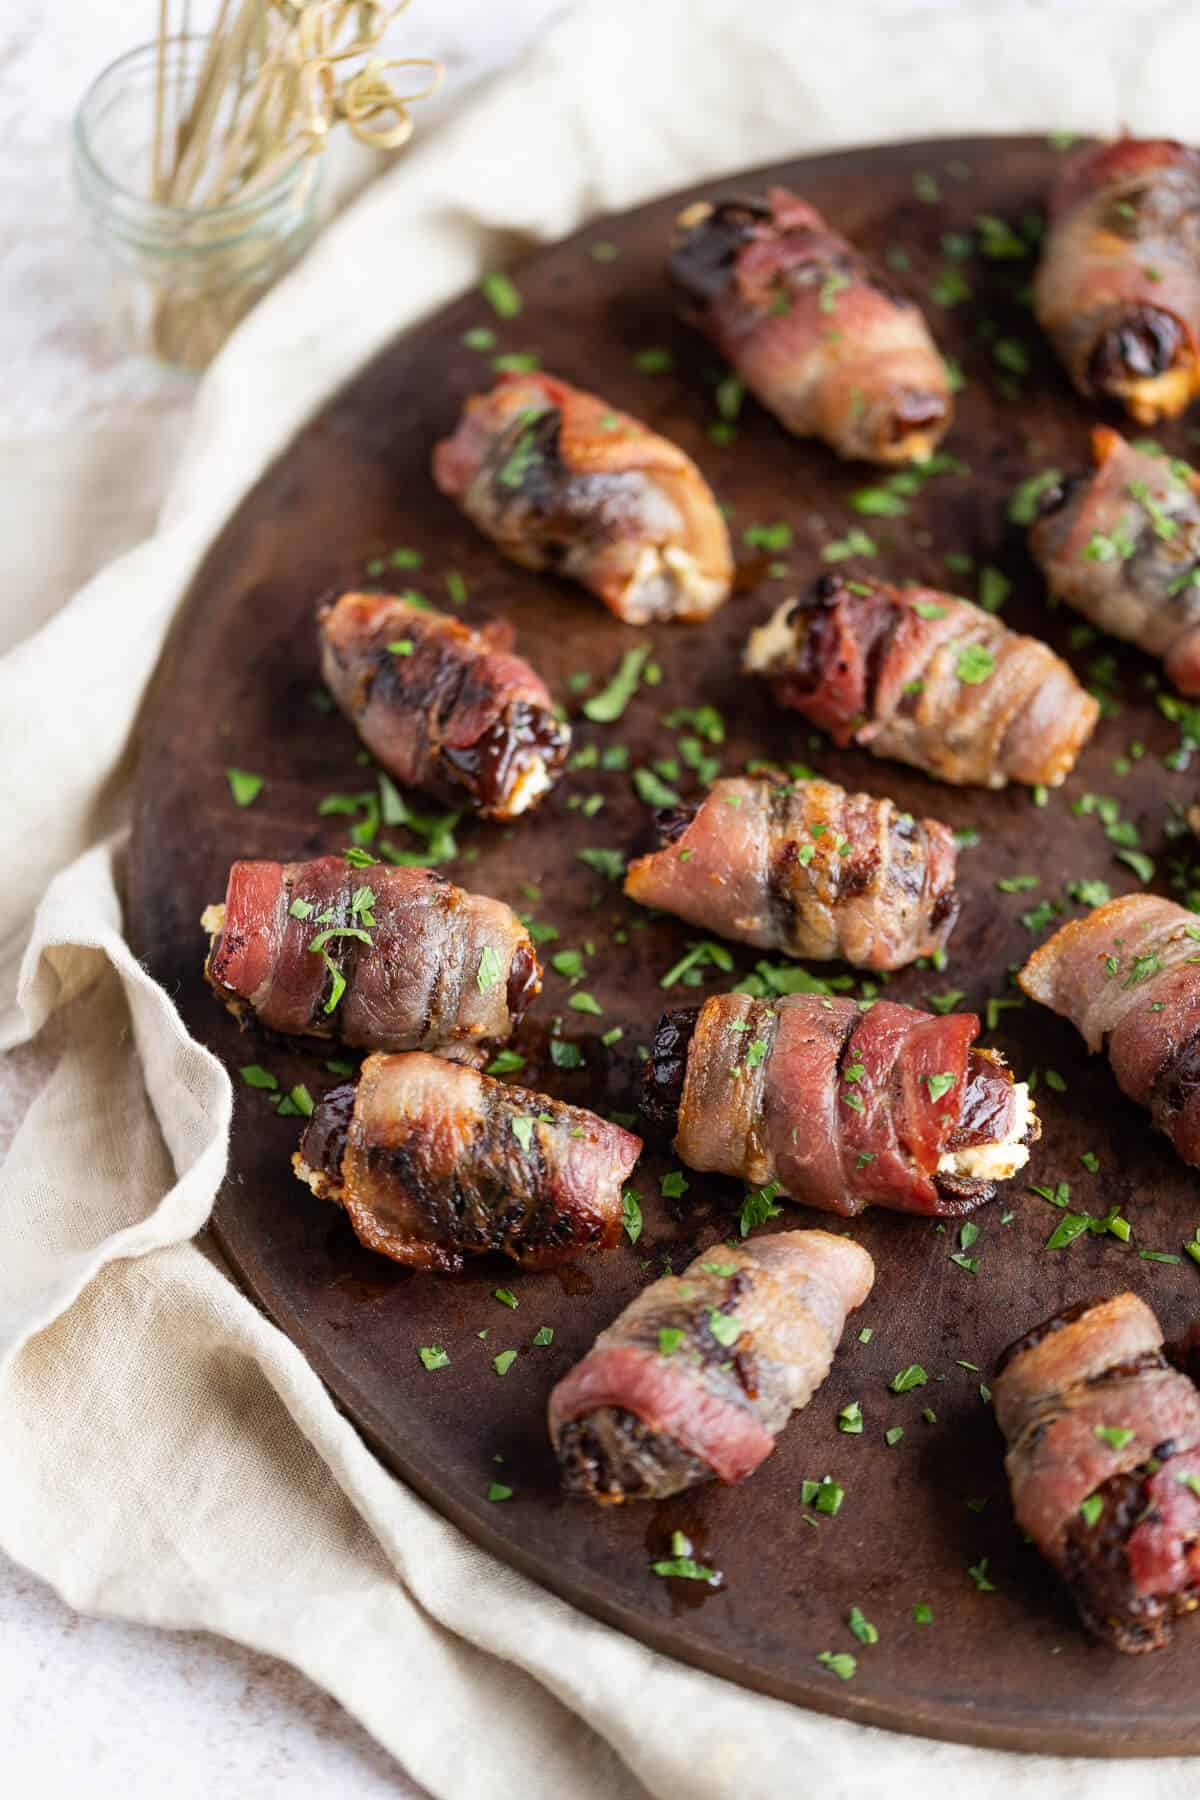 Goat cheese stuffed dates, wrapped in bacon, on a round serving platter.